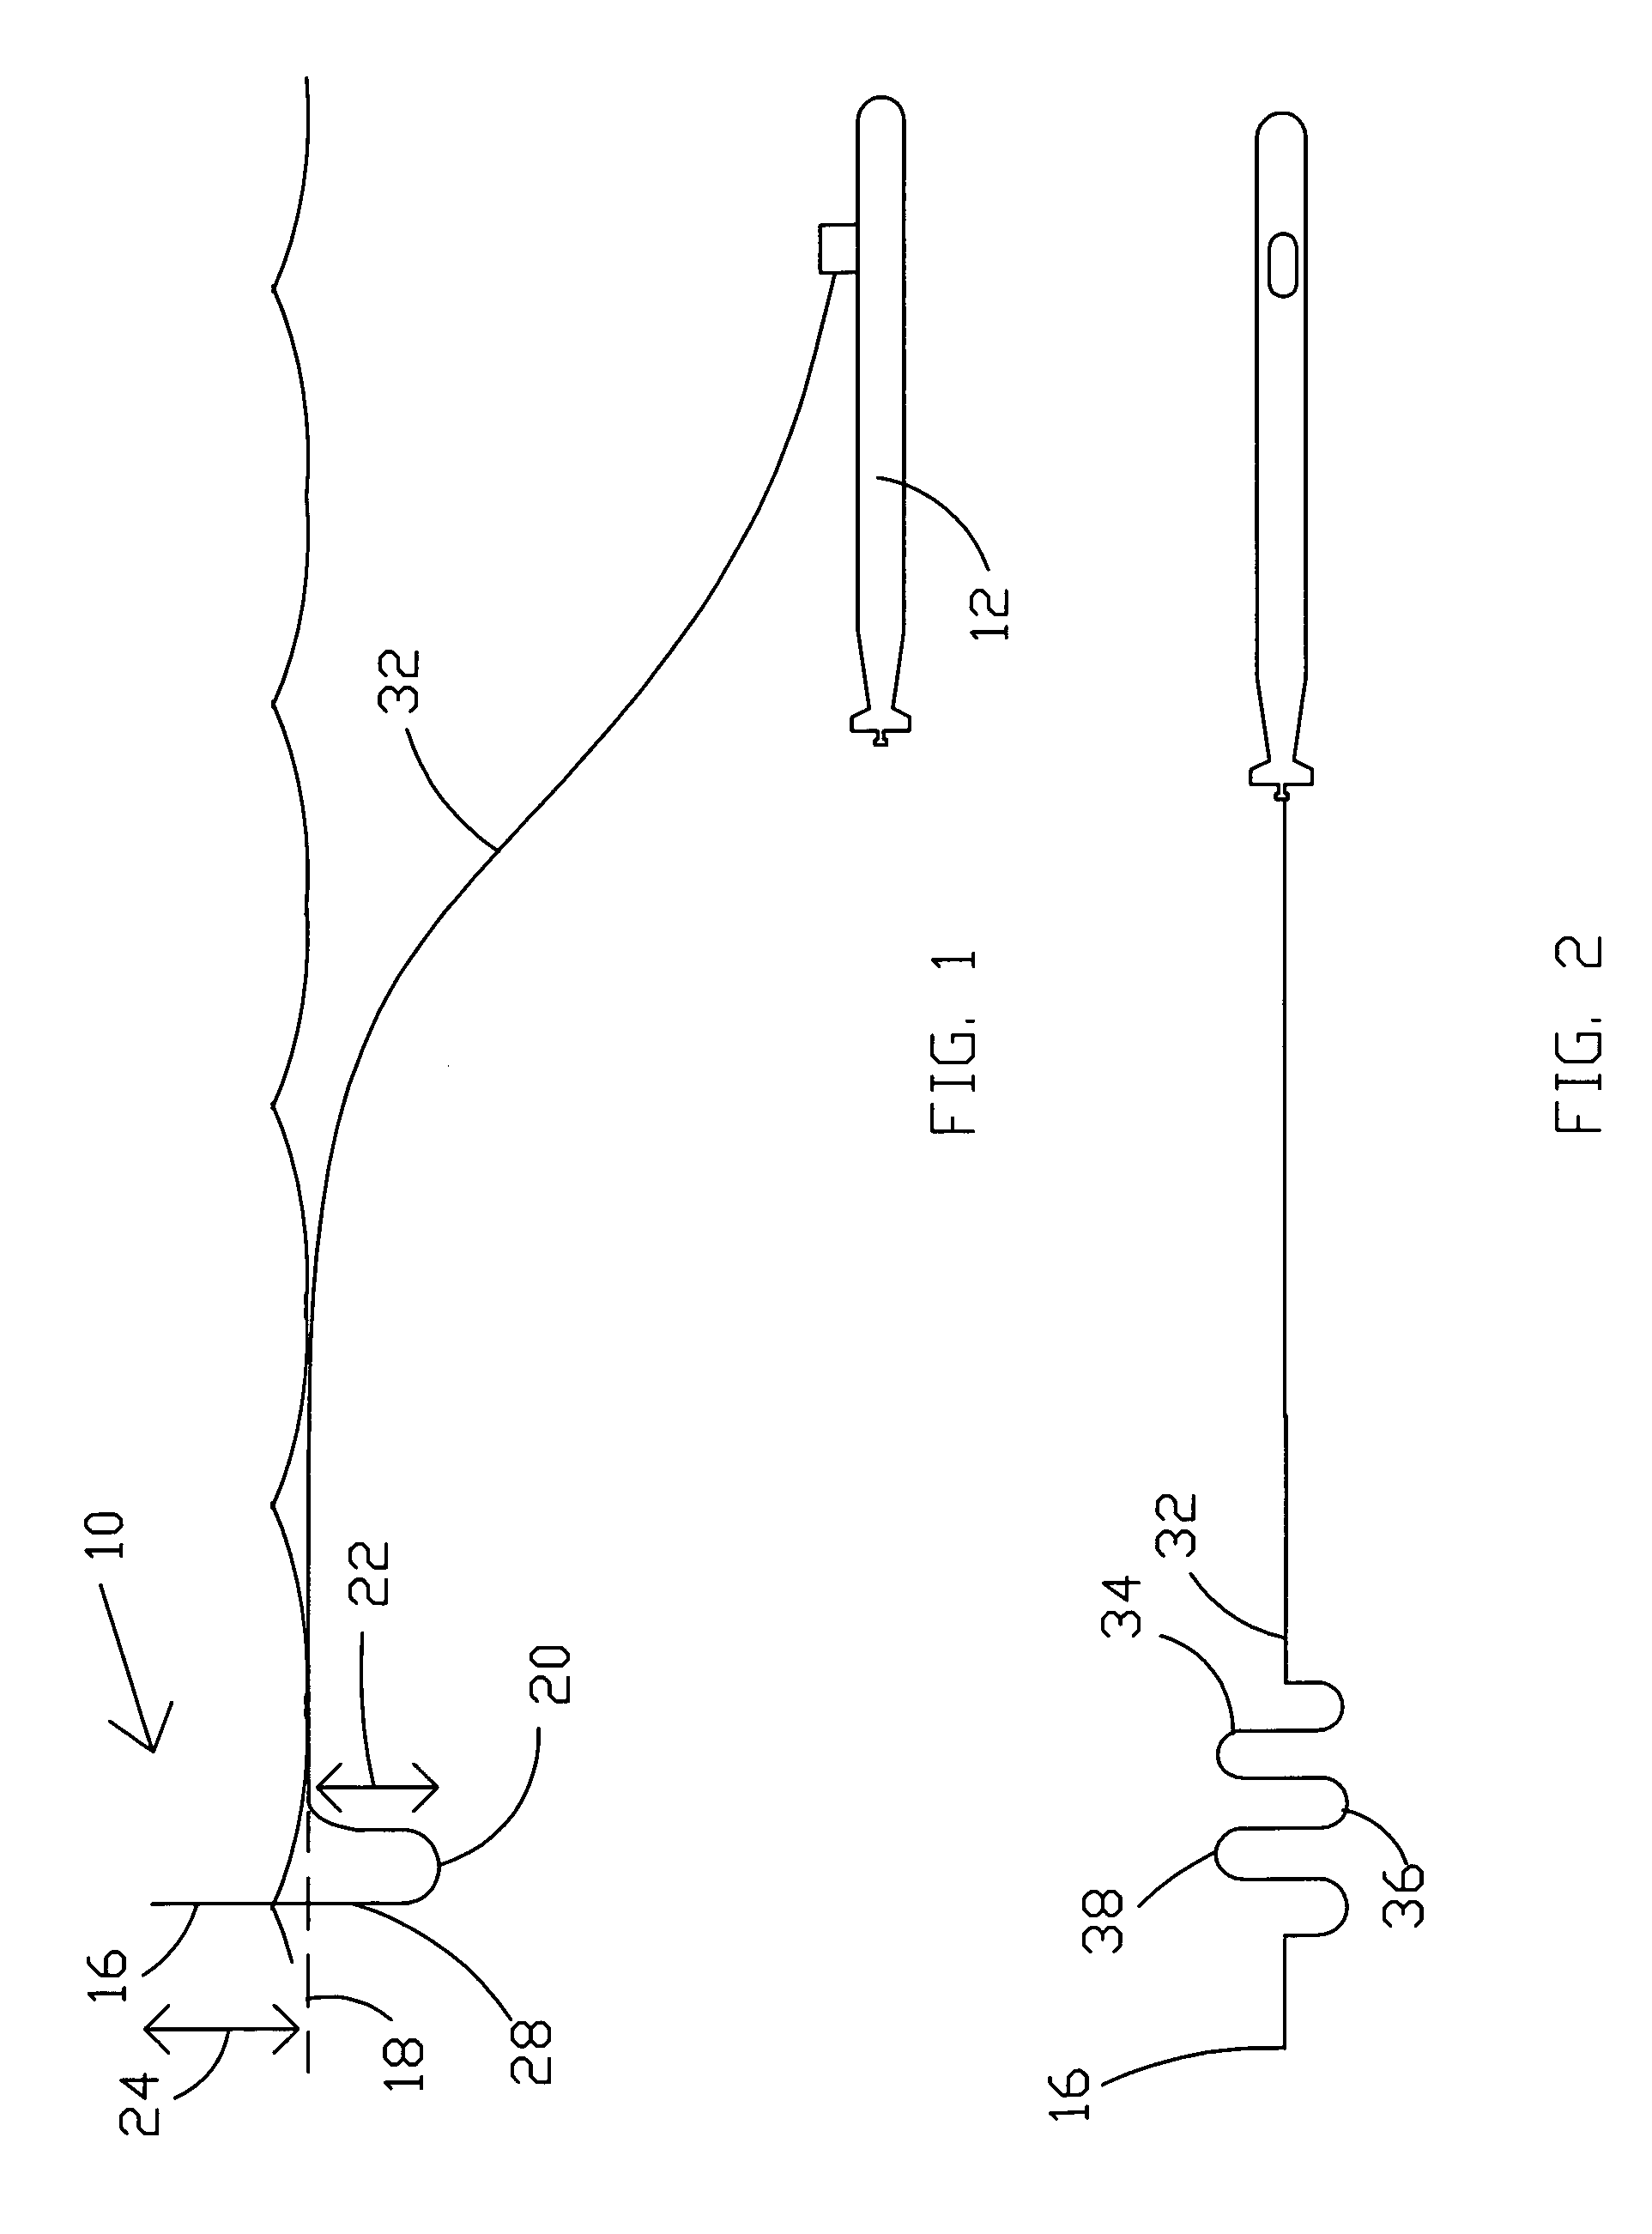 Buoyant cable antenna configuration and system